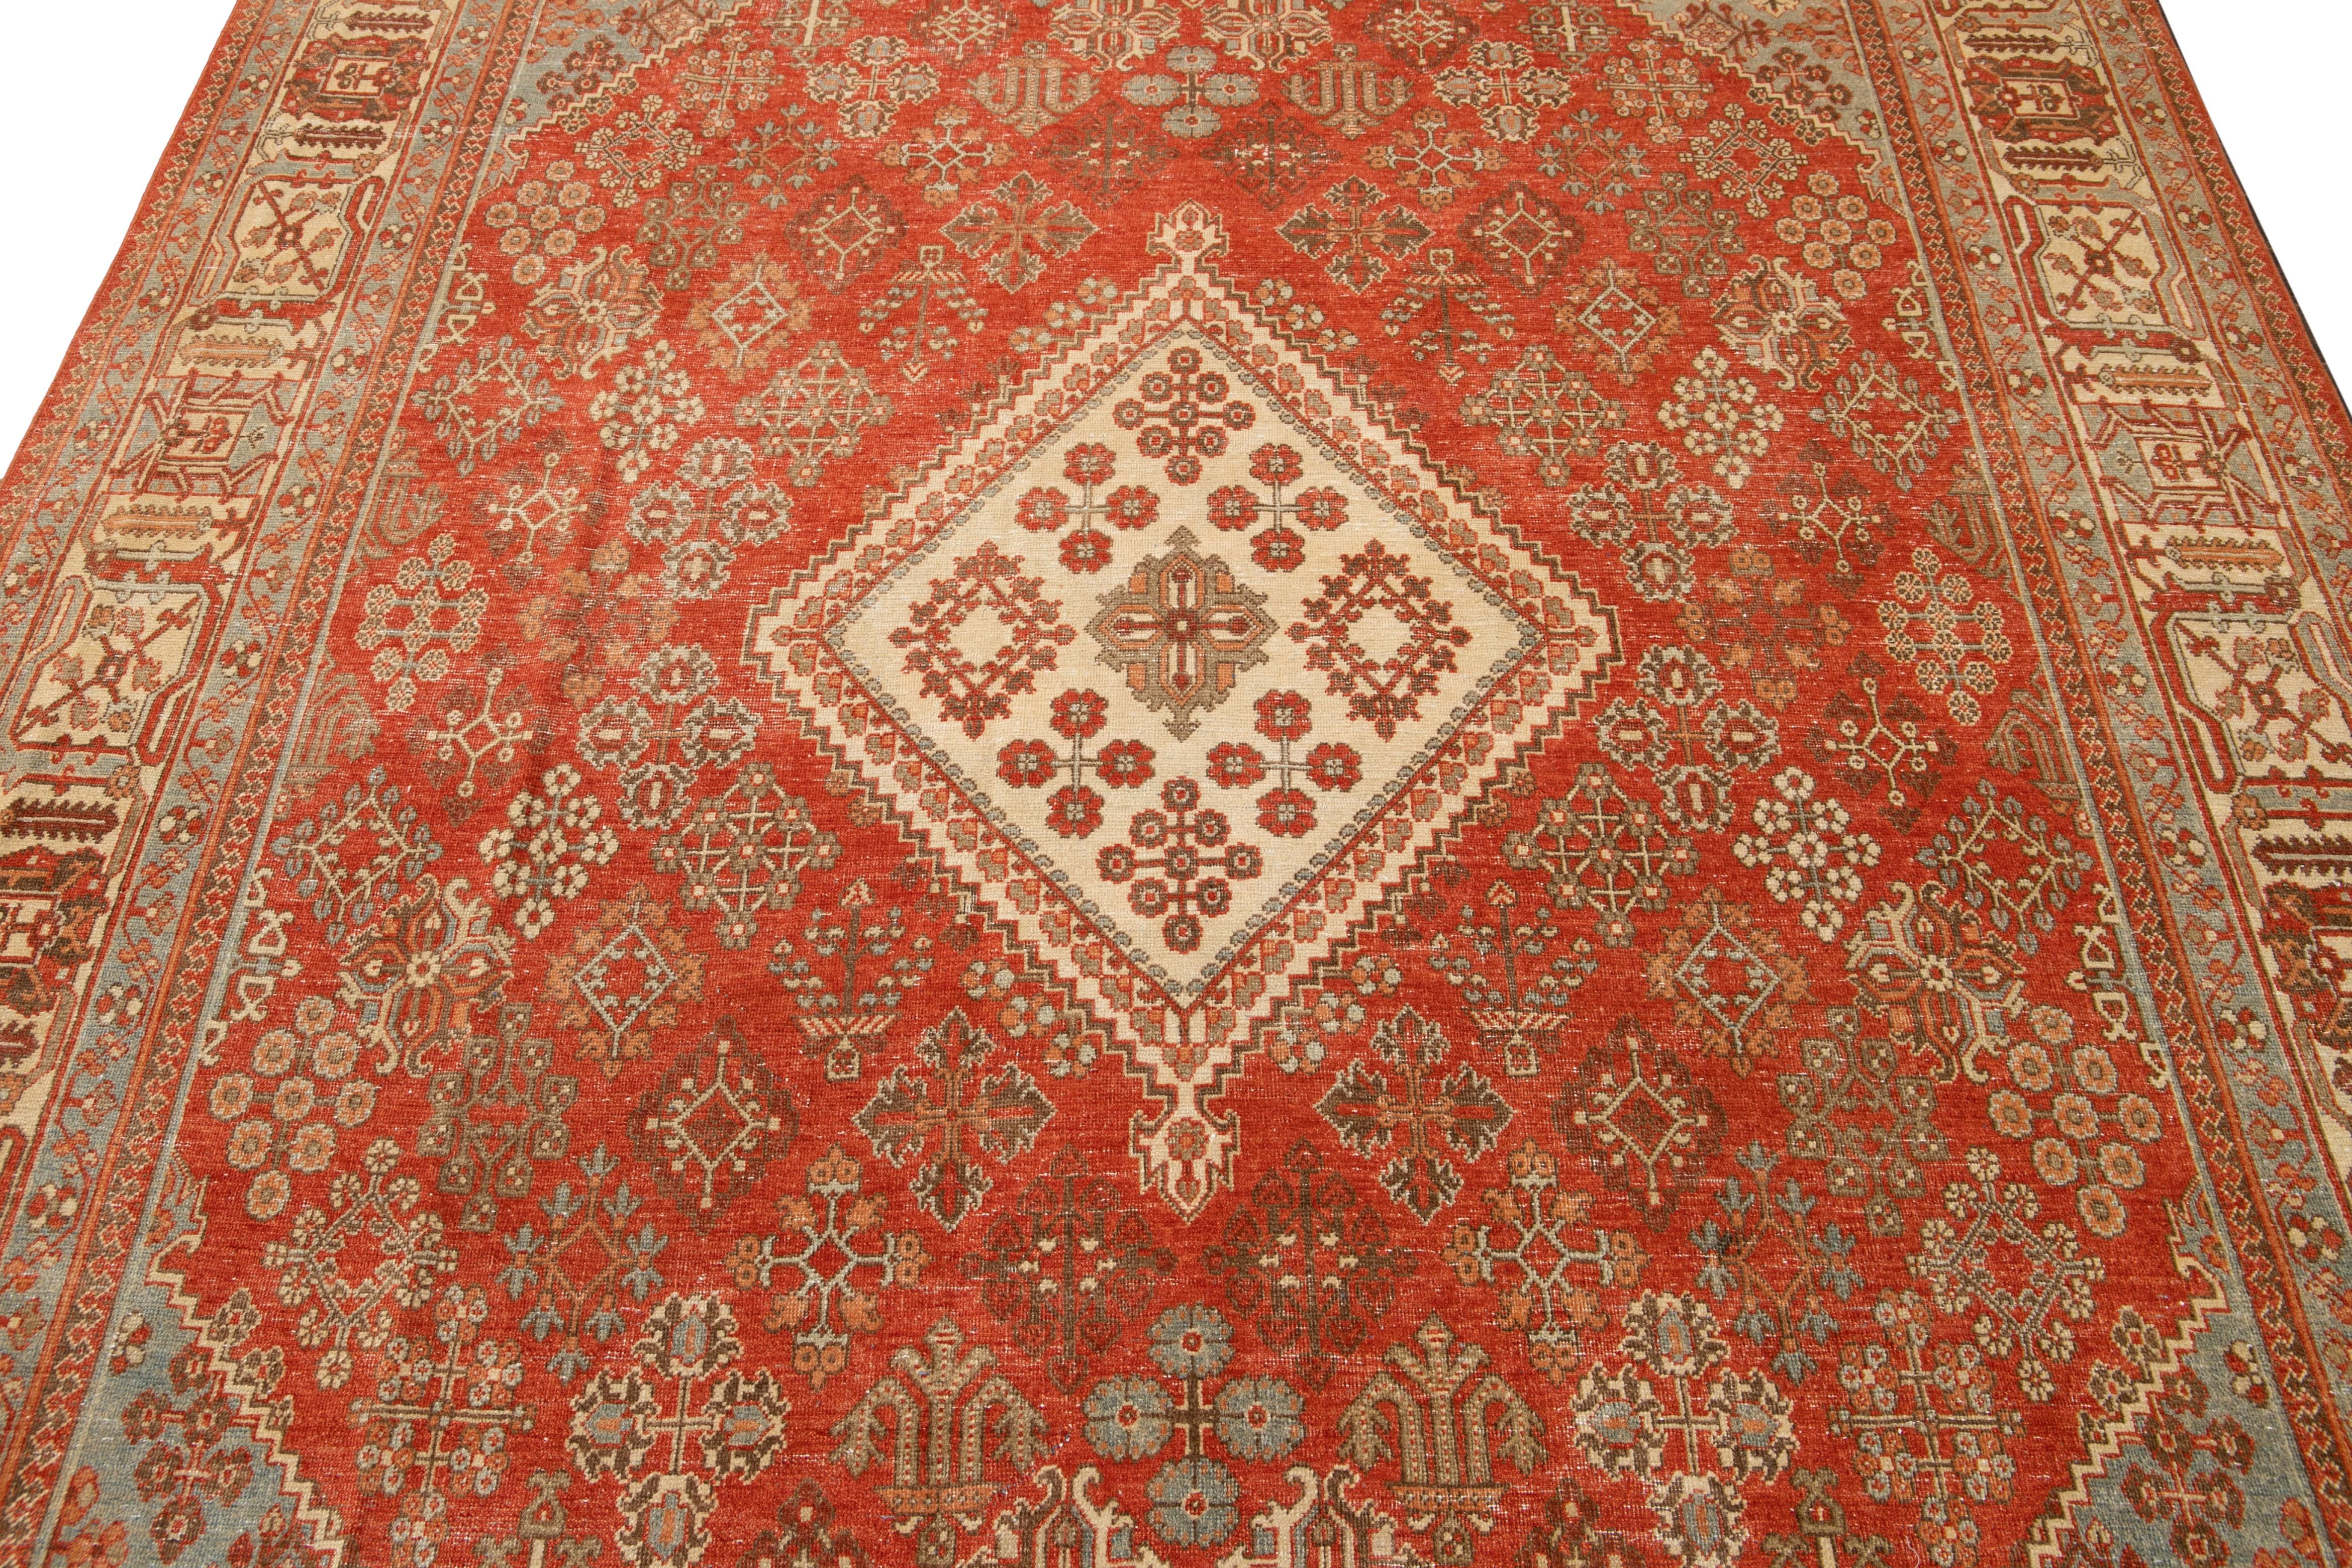 This Josheghan Persian wool rug boasts a captivating antique allure. Meticulously hand-knotted using premium quality wool, it features an alluring orange-rust field with striking multi-color accents arranged in a mesmerizing all-over multi-medallion